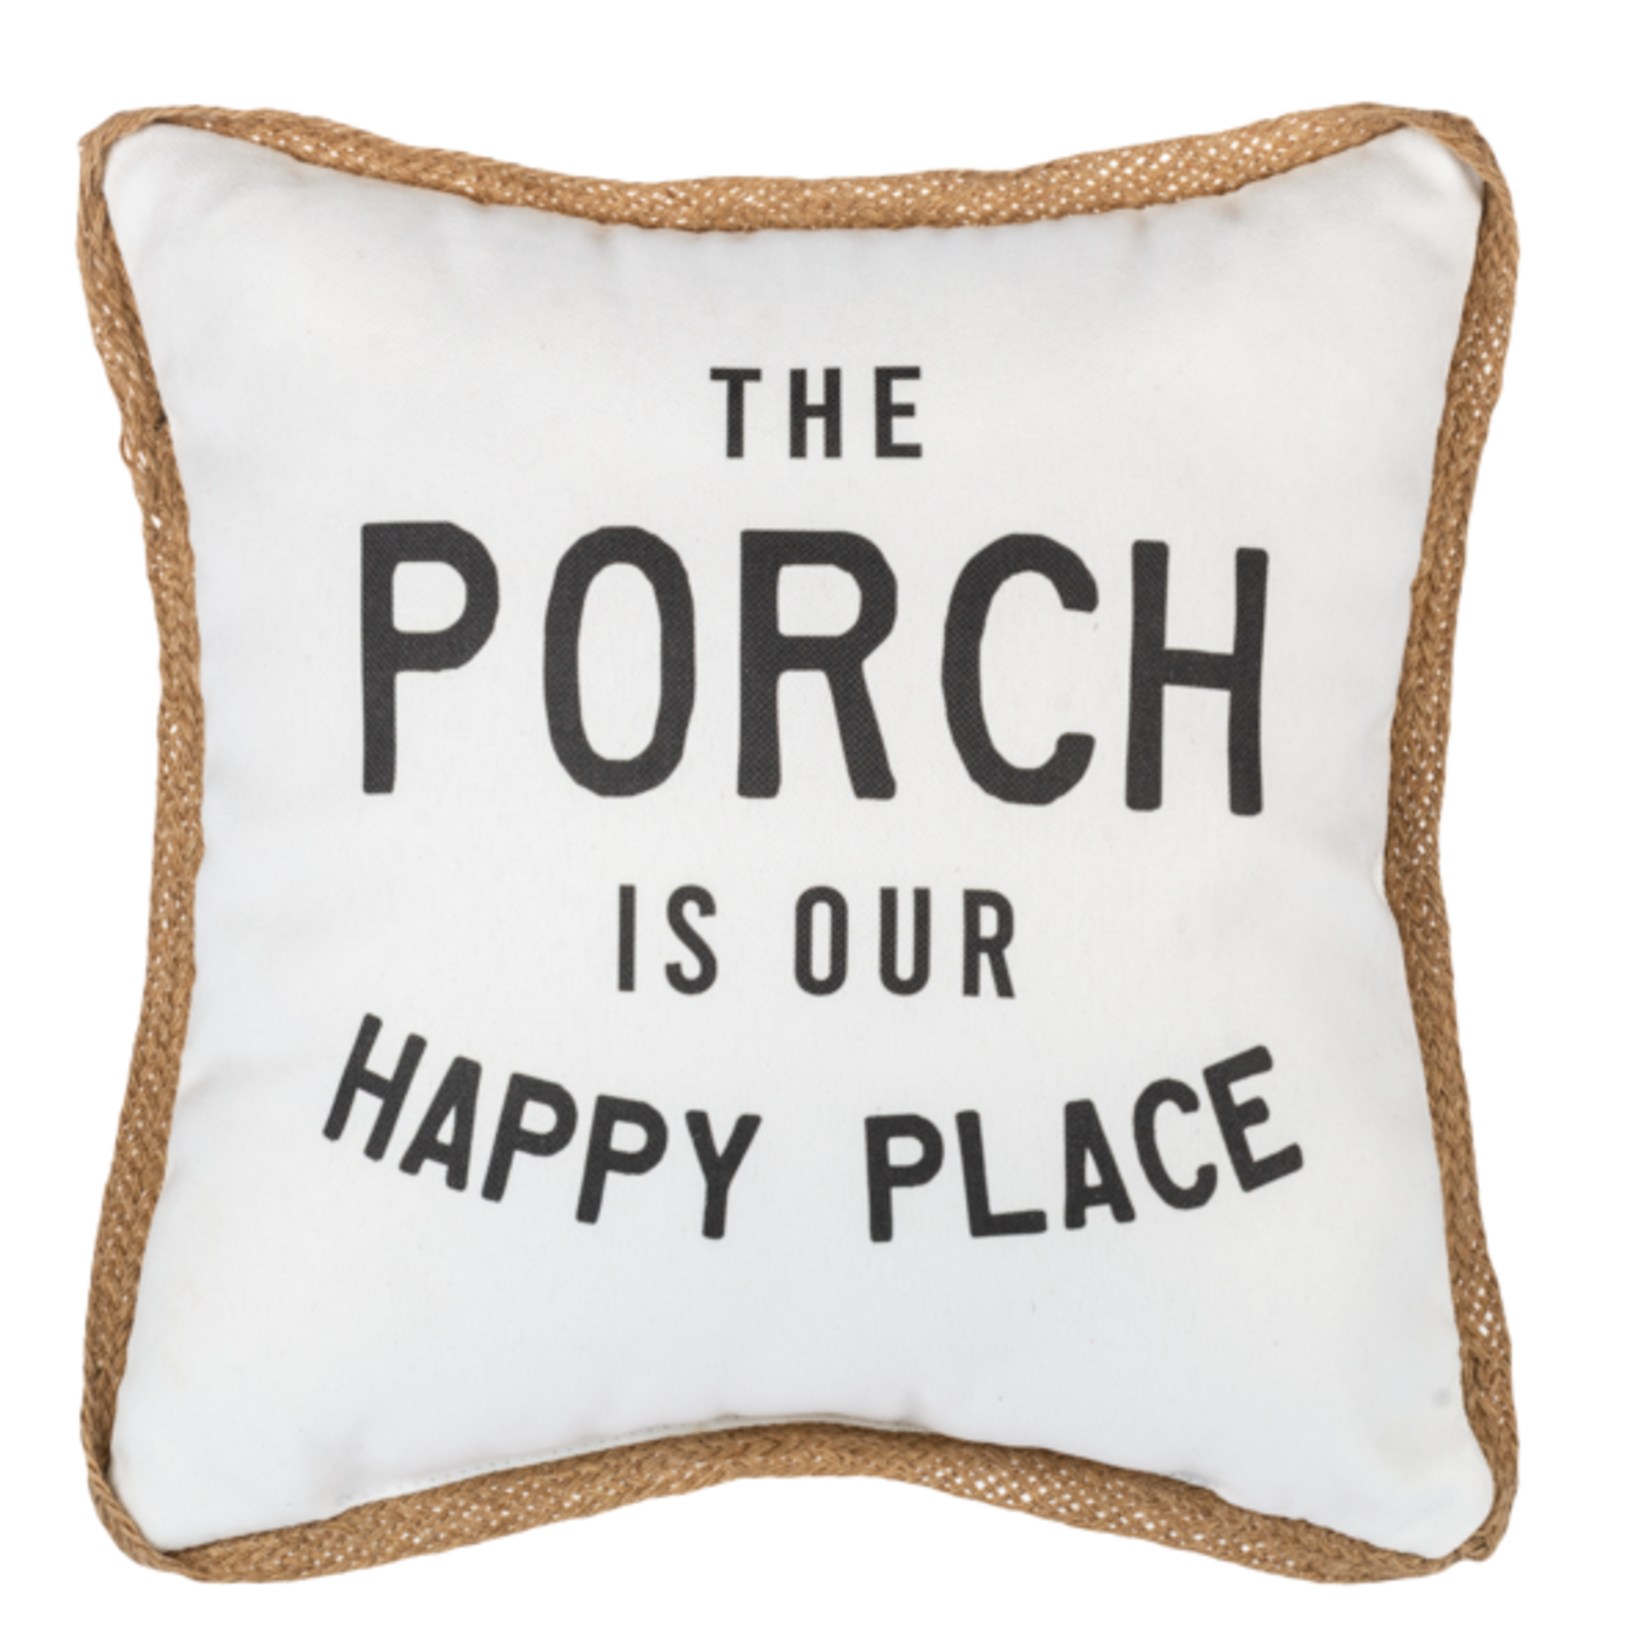 Ganz White Porch Pillow Our Happy Place